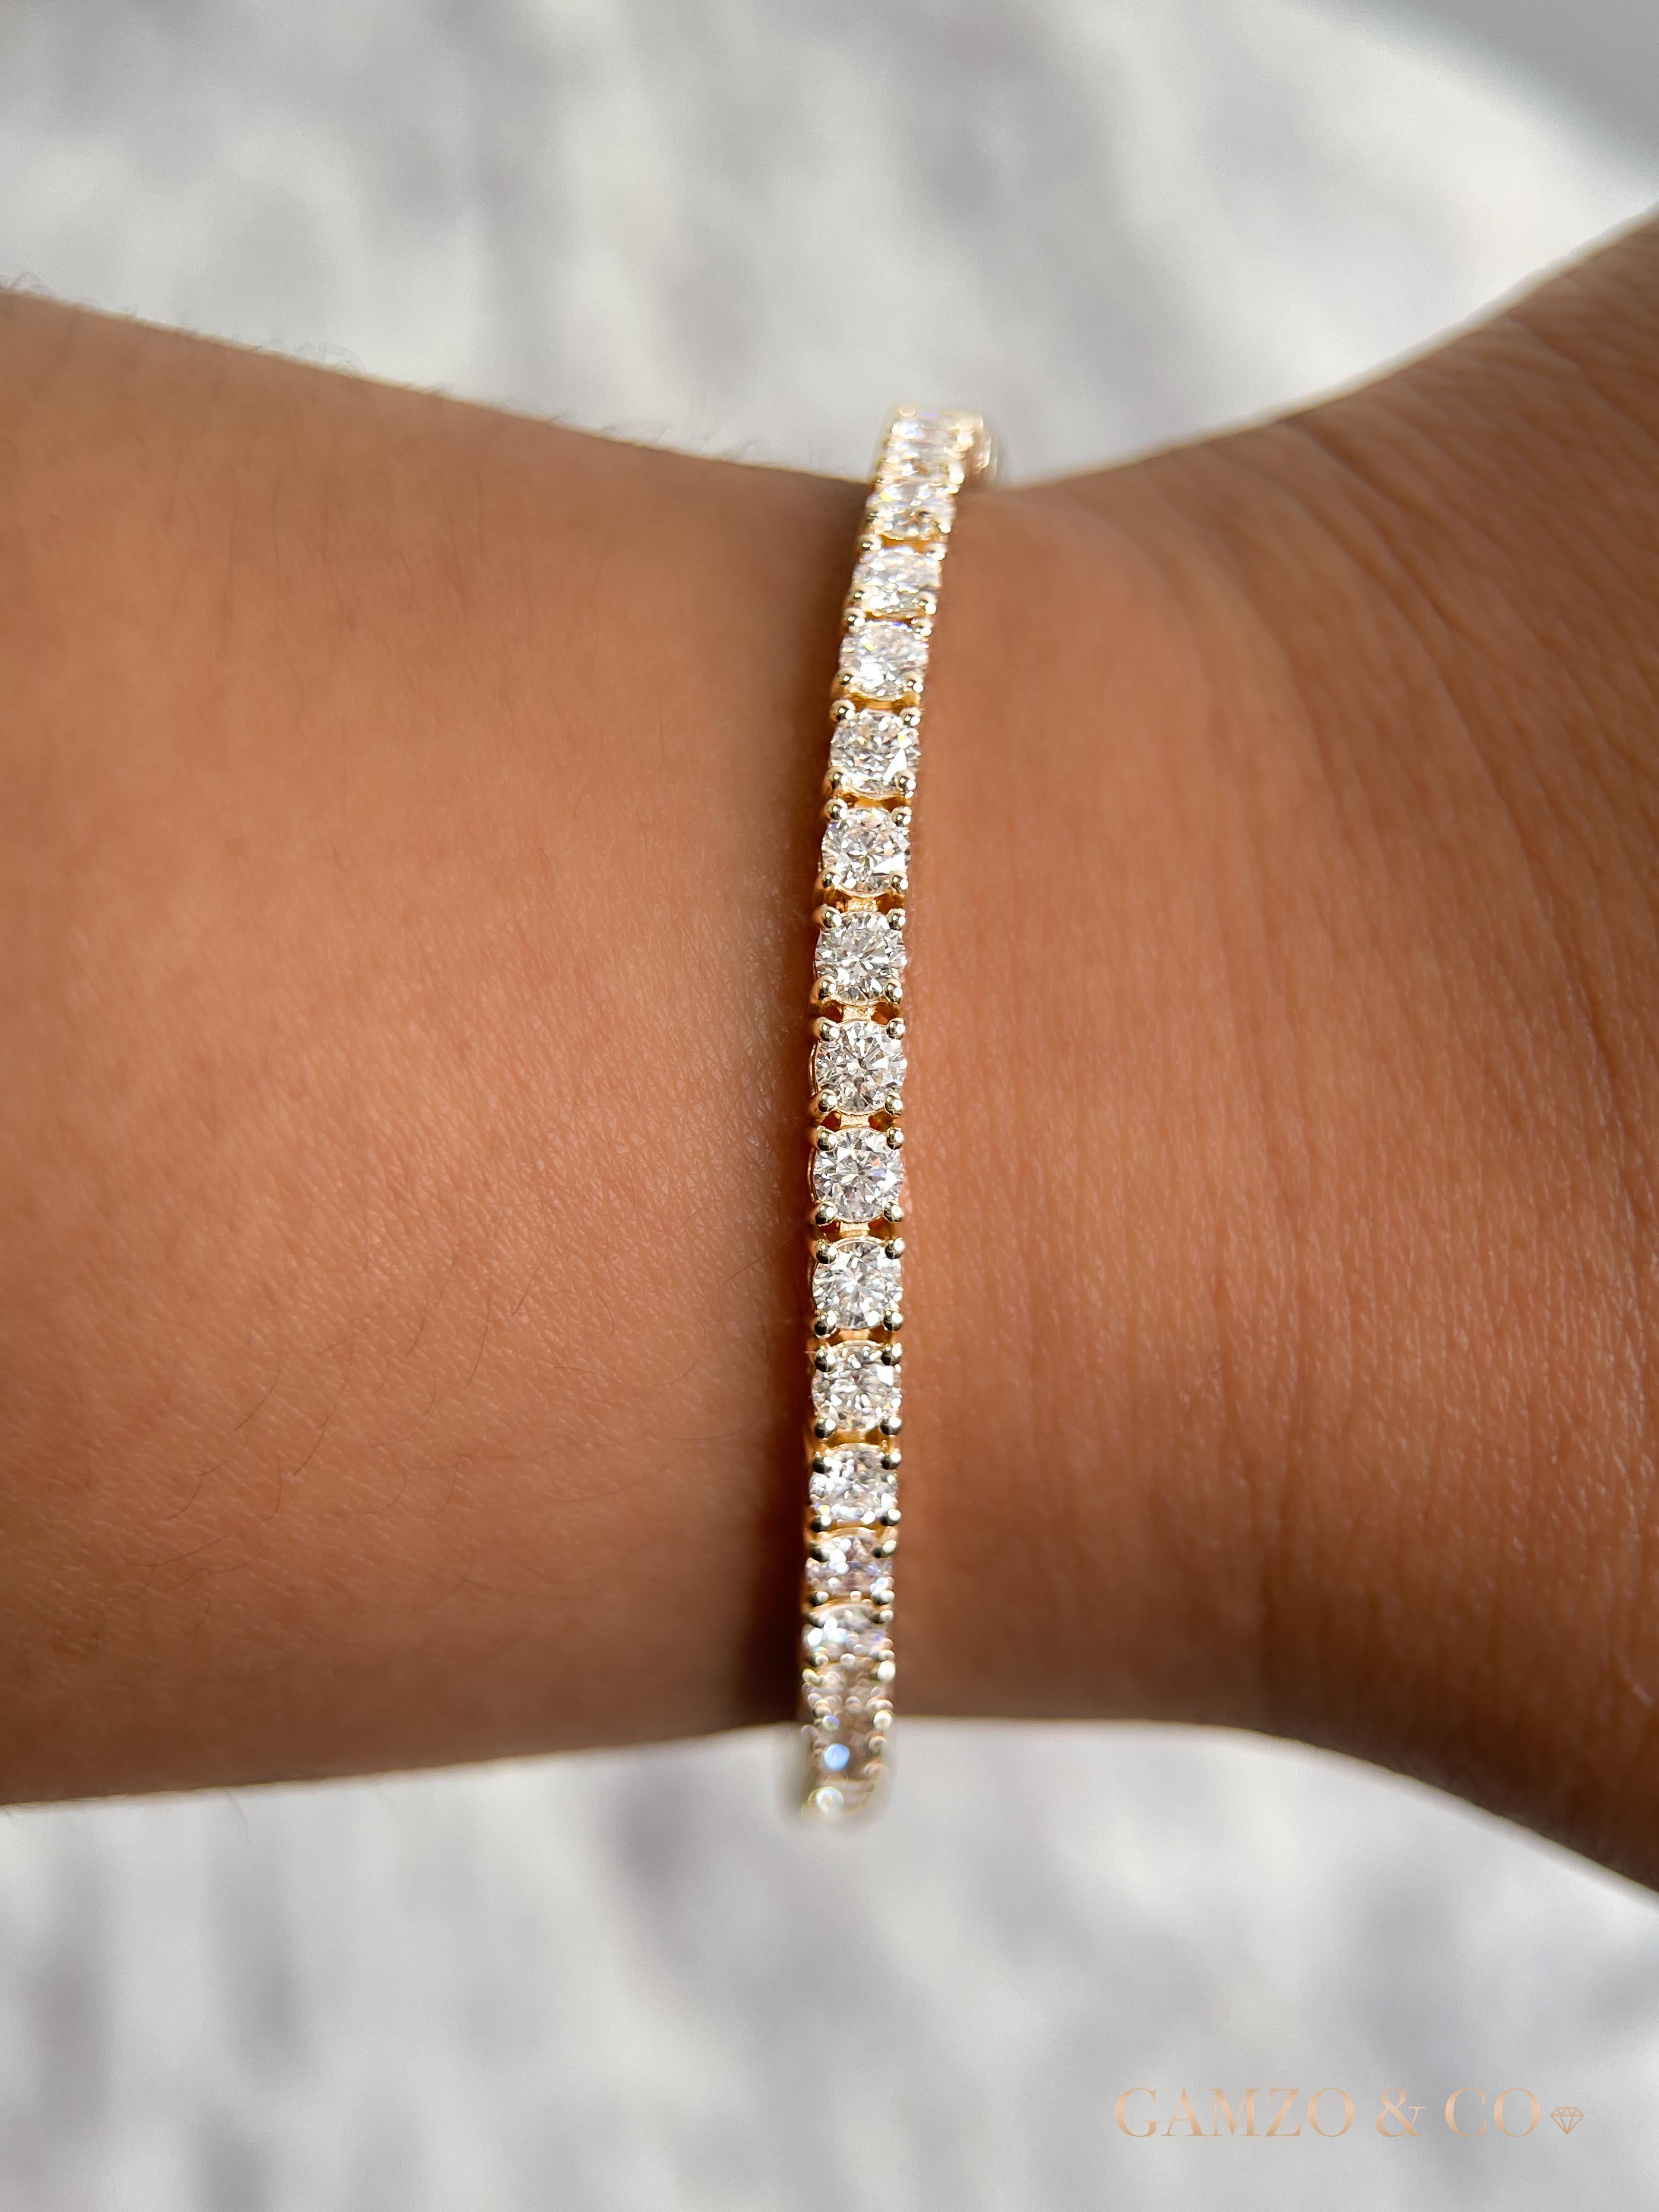 This diamond tennis bracelet features beautifully cut round diamonds set gorgeously in 14k gold.

Metal: 14k Gold
Diamond Cut: Round Natural Diamond 
Total Diamond Carats: 7ct
Diamond Clarity: VS
Diamond Color: F-G
Color: Rose Gold
Bracelet Length: